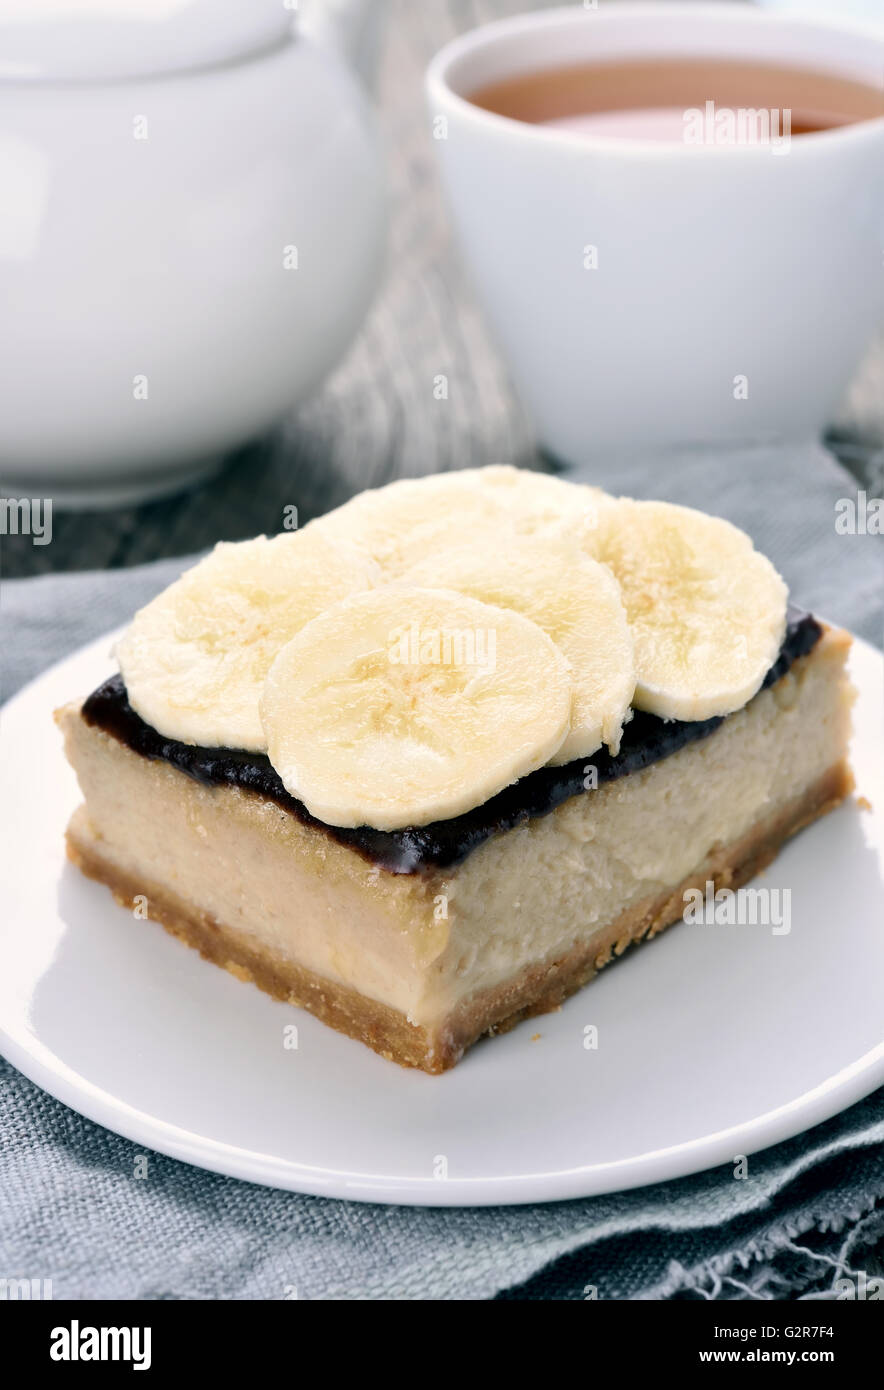 Cheese cake banane et thé, country style Banque D'Images